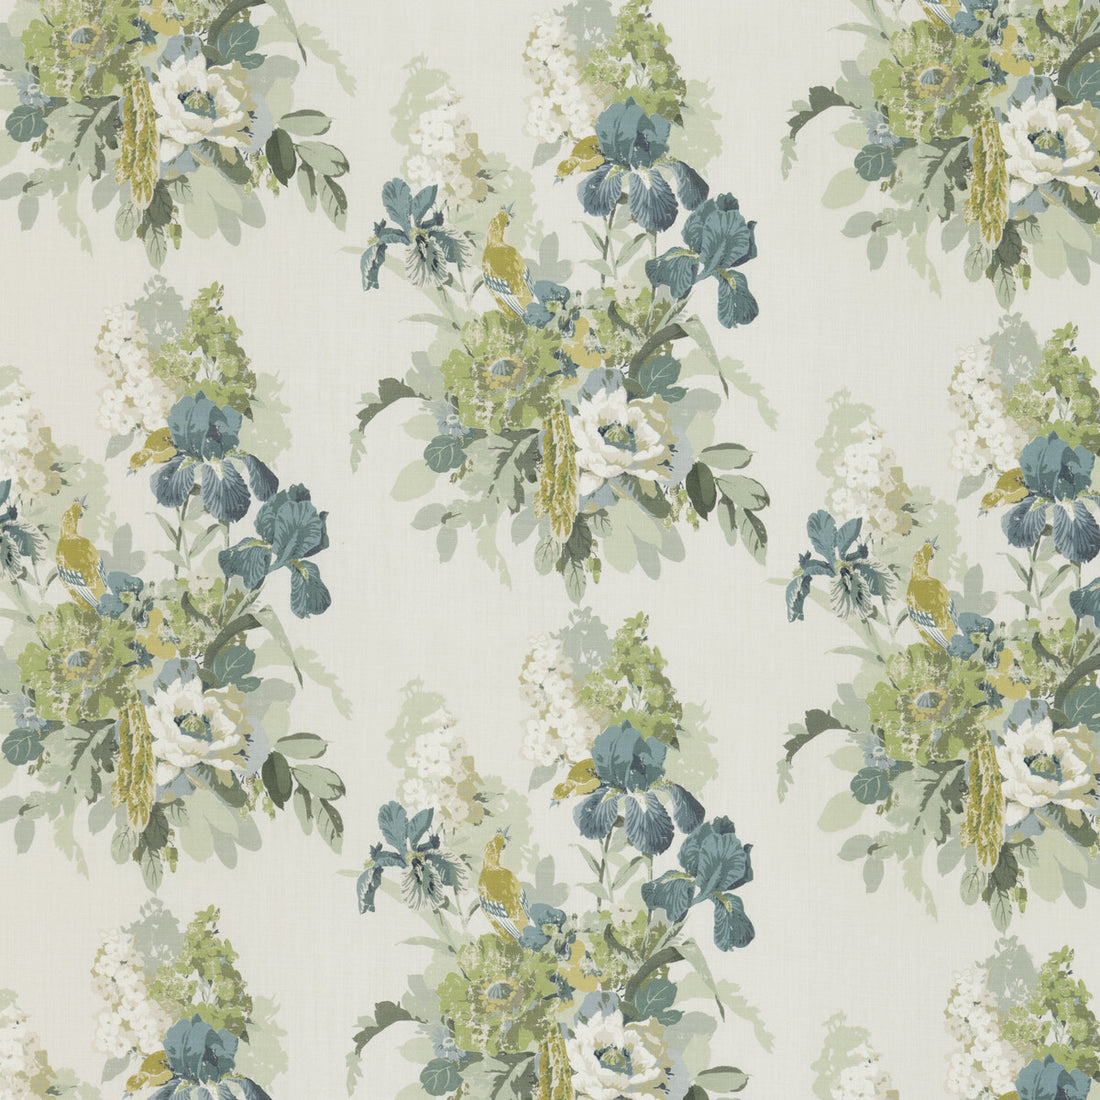 Bird &amp; Iris fabric in soft teal color - pattern BP10774.4.0 - by G P &amp; J Baker in the Signature Prints collection